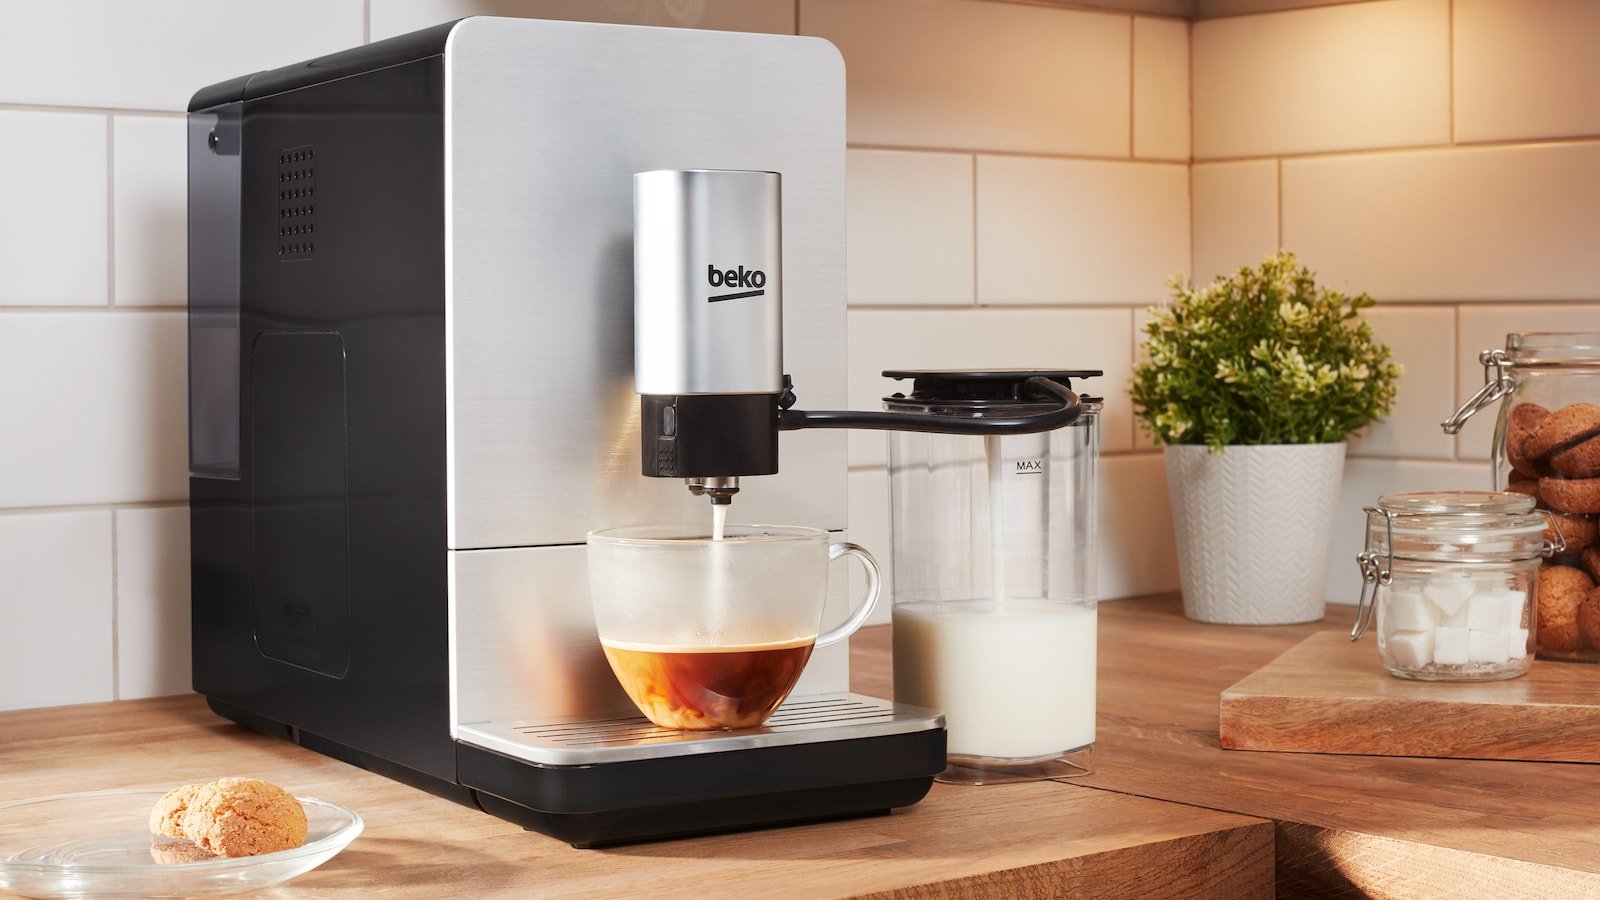 Beko Bean To Cup milk frothing coffee machine lets you make any coffee drink at home